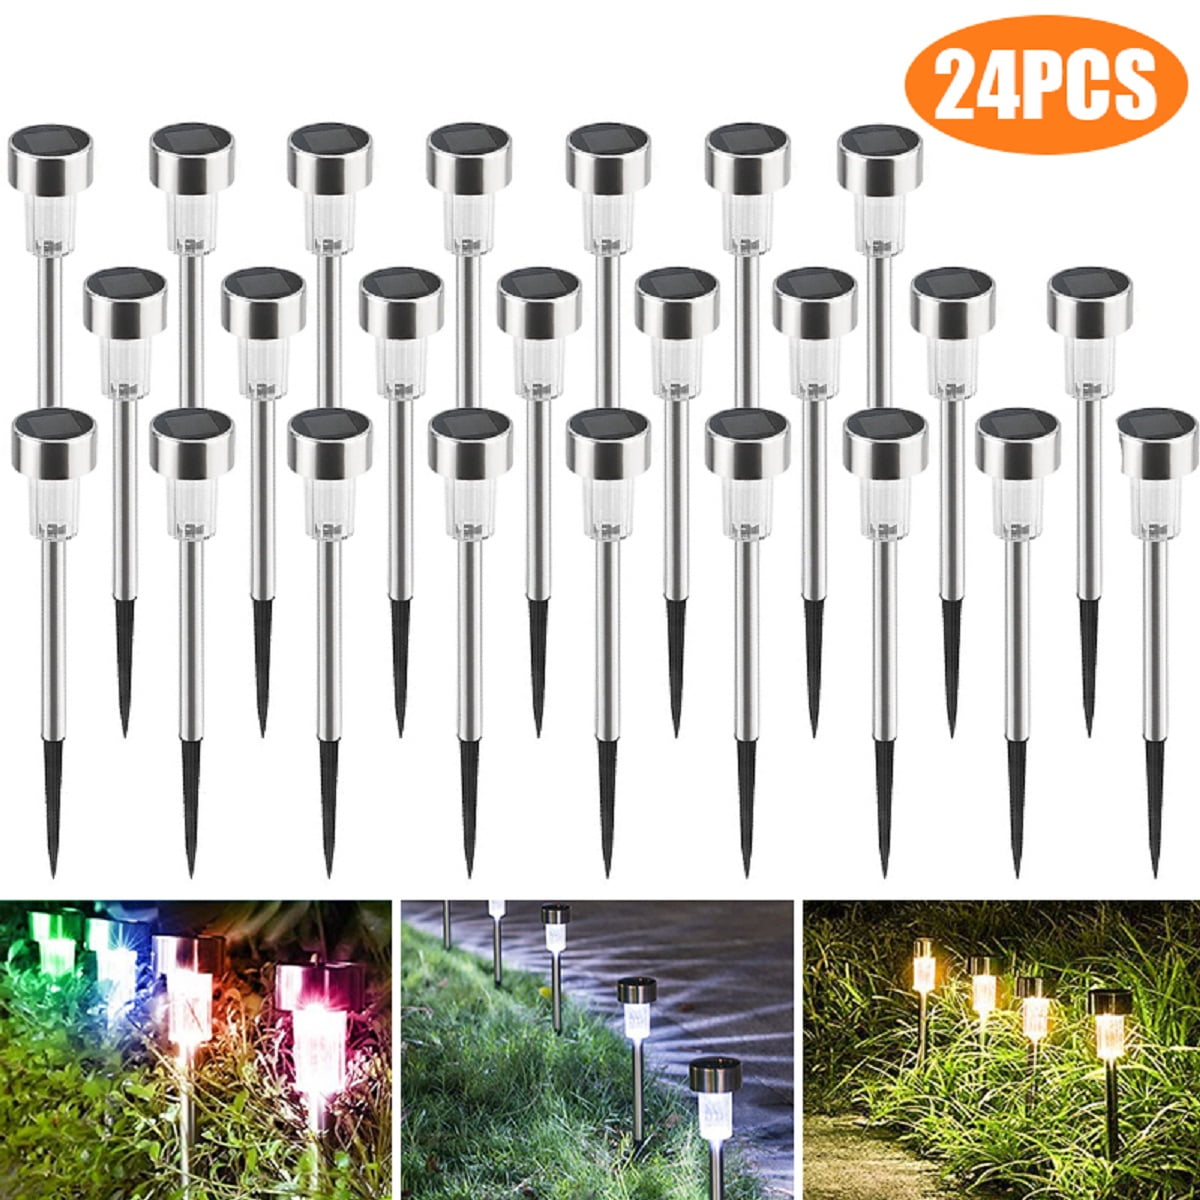 Light Lawn Solar Garden Patio Stake Decor 8 Led Water Resistant Stainless Steel 